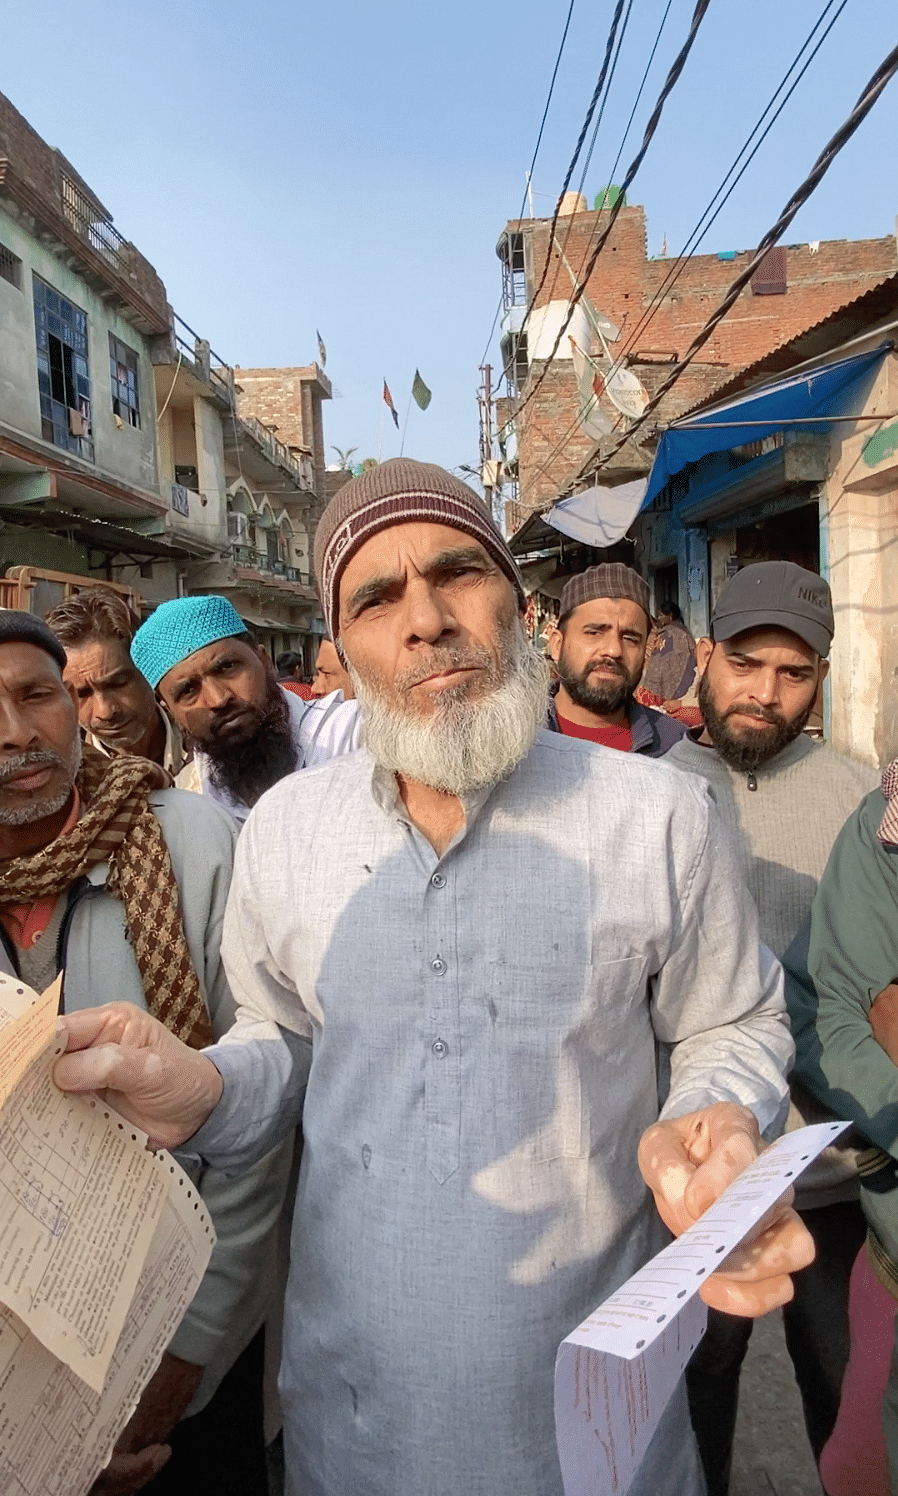 The Quint visited Haldwani on Monday, 2 January, to speak to the residents of the colony and document their claims.